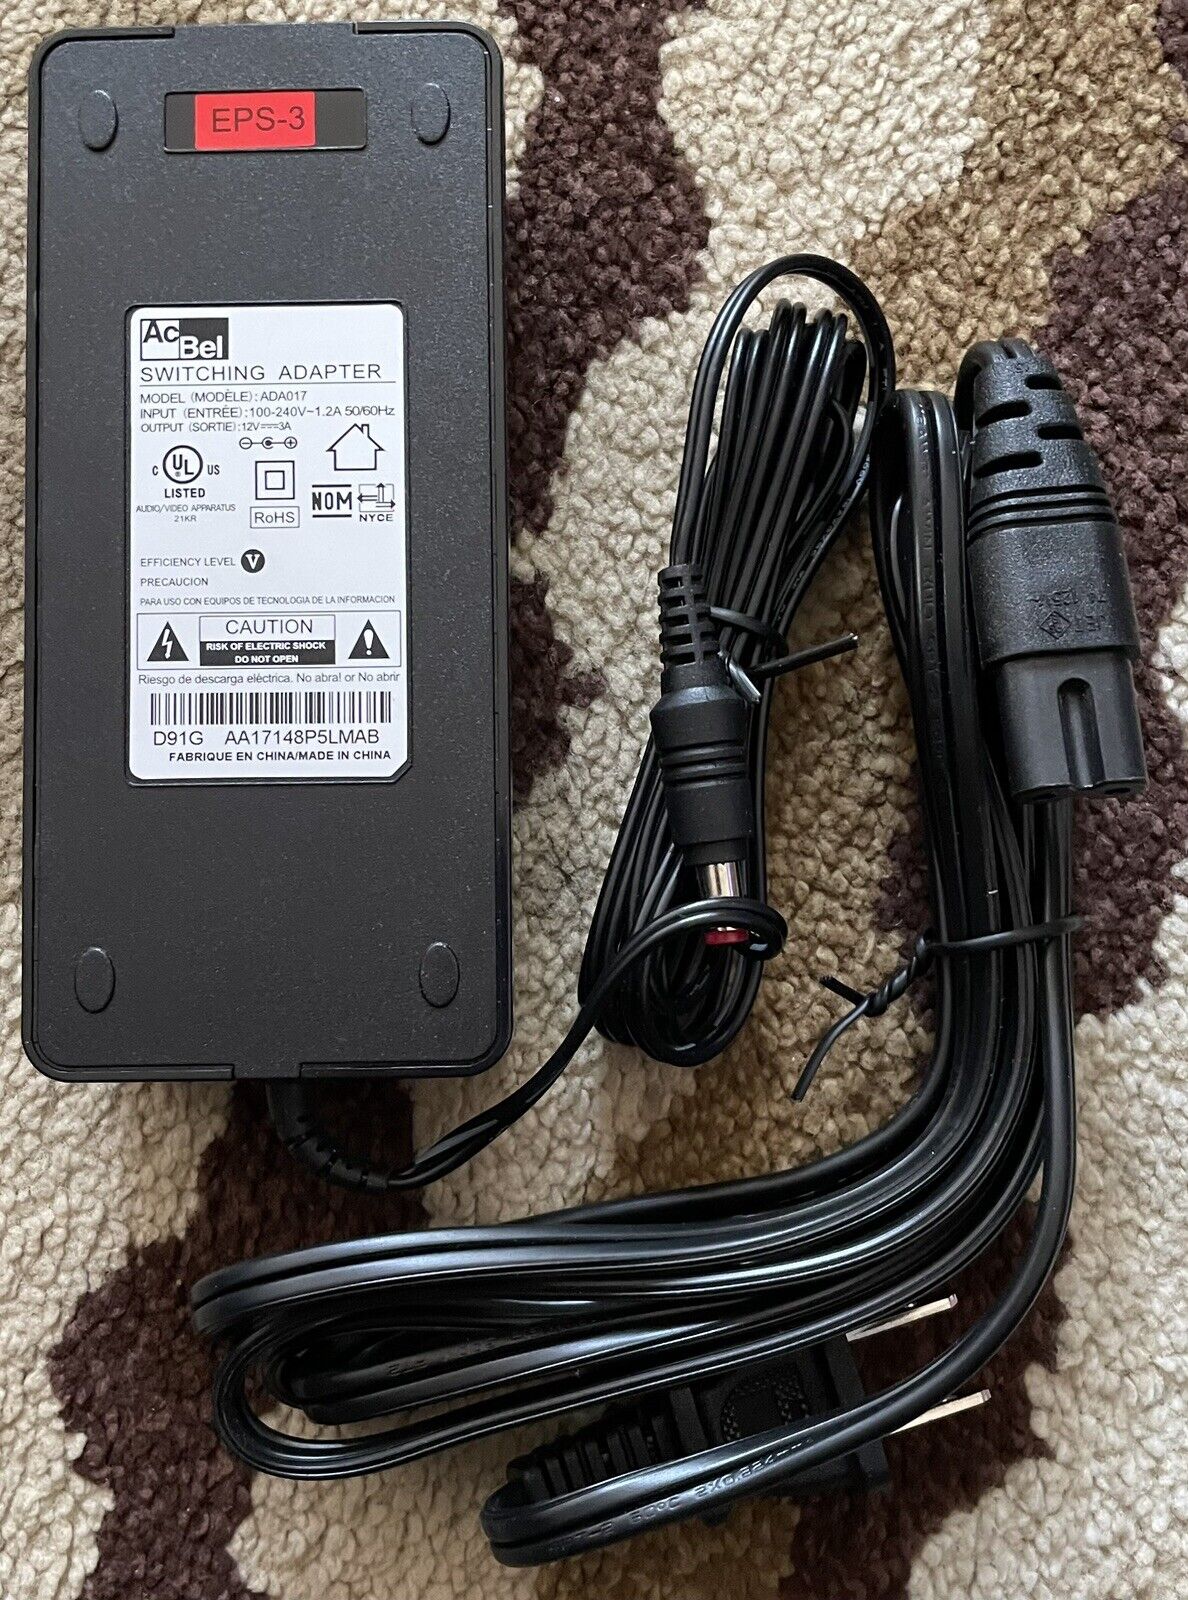 AcBel EPS-3 Switching Adapter ADA017 100-240V 1.2A 50/60Hz 12V 3A New MPN ADE033 Brand AcBel Type Adapter Manufacturer